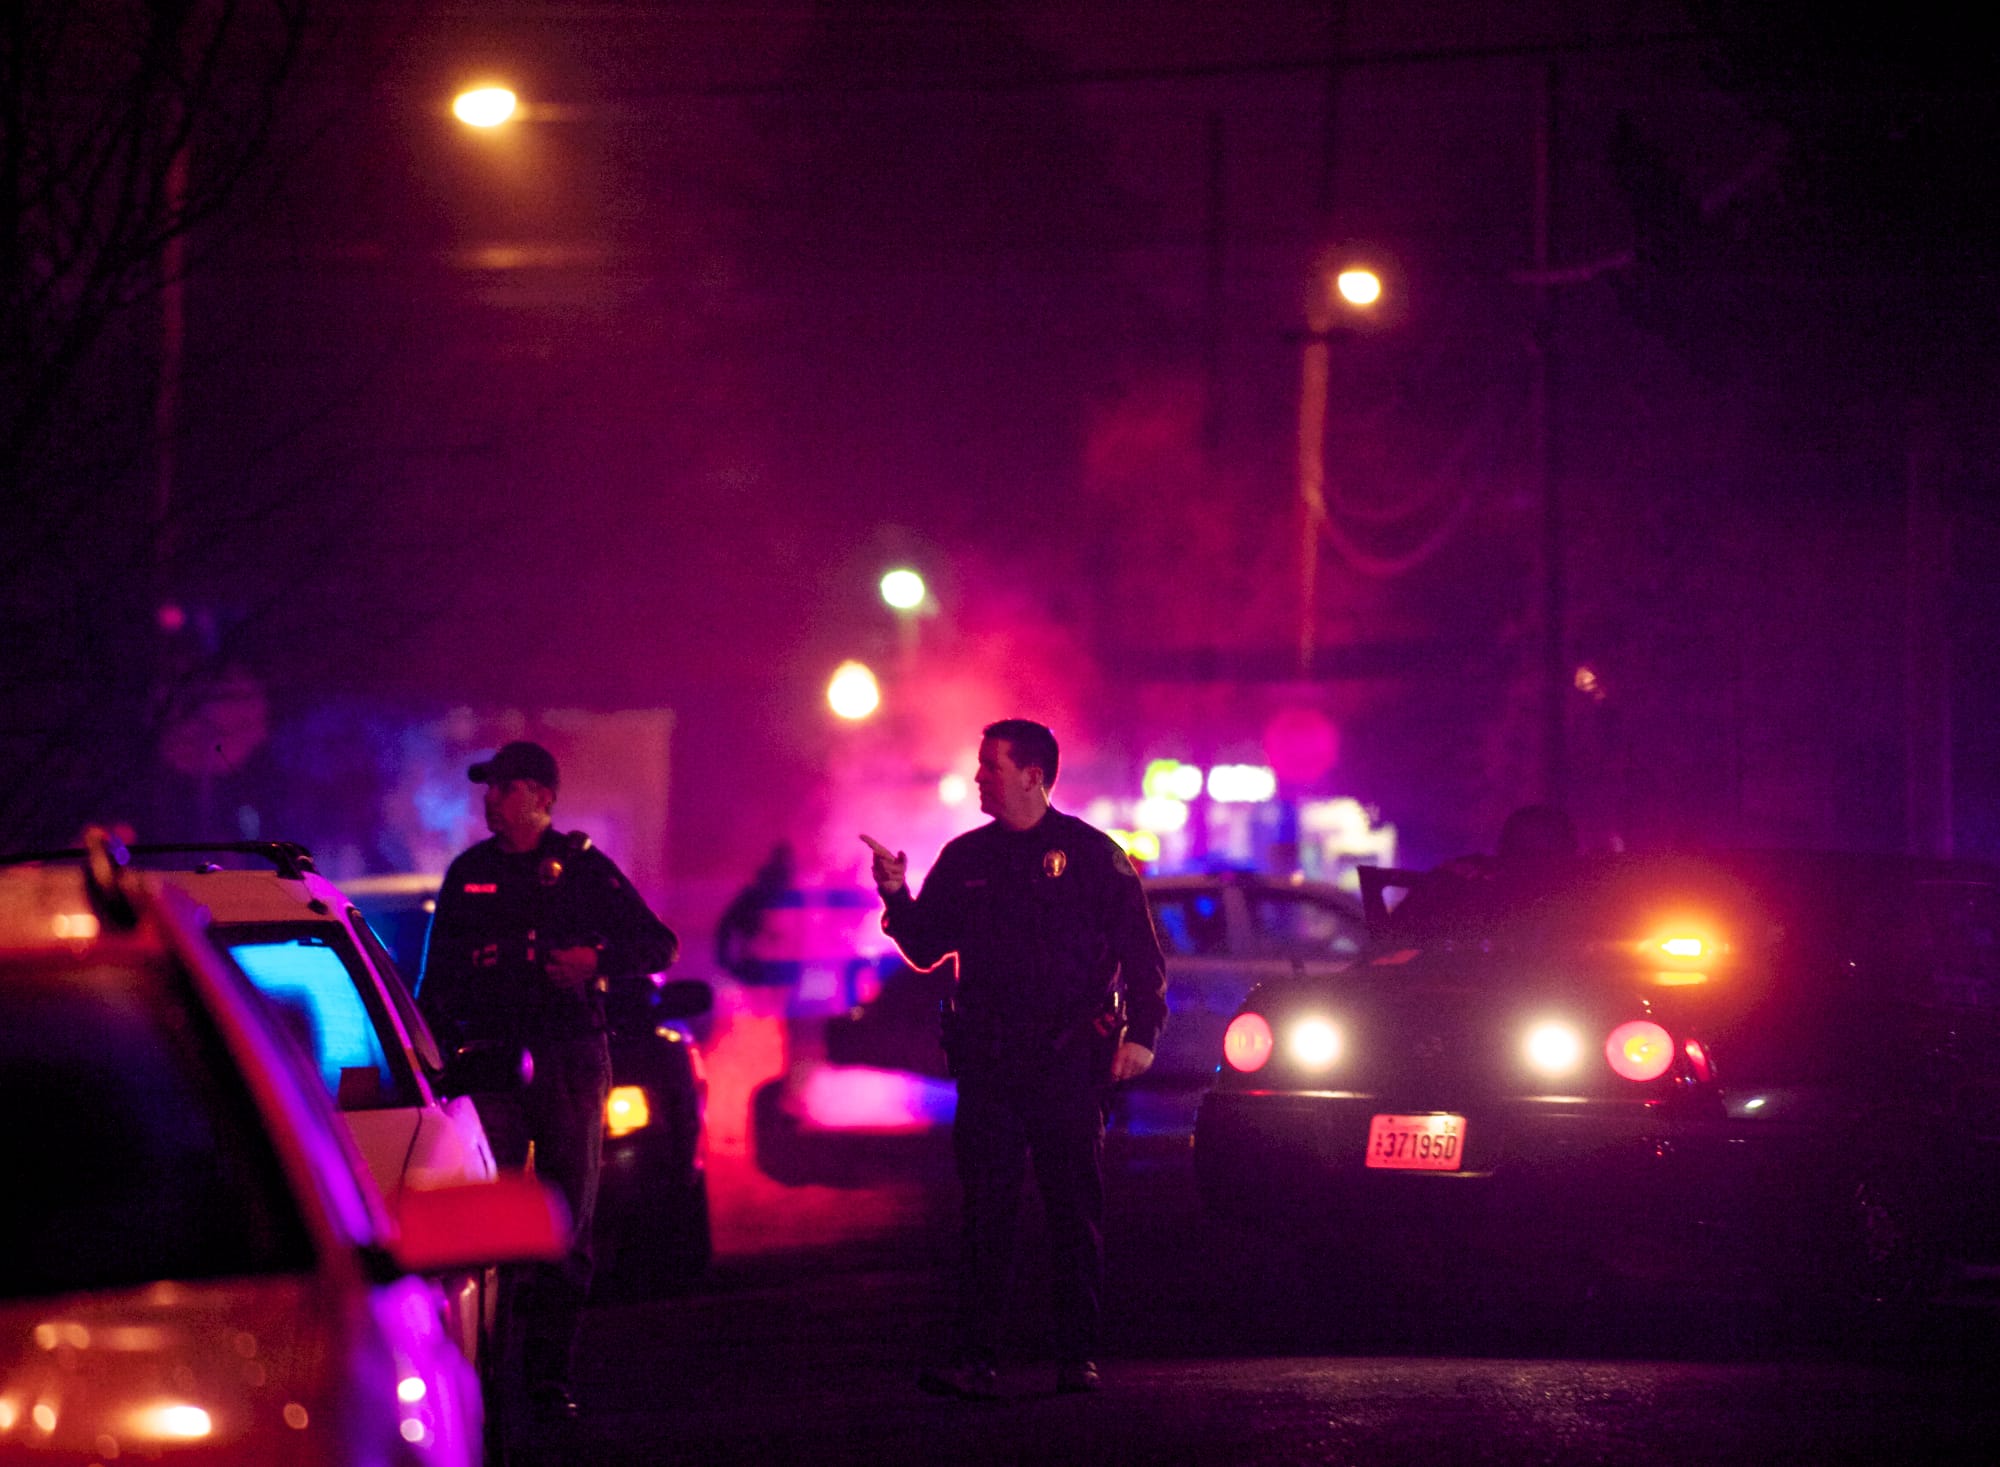 Police converge in Vancouver's Arnada neighborhood after an officer-involved shooting late Friday.